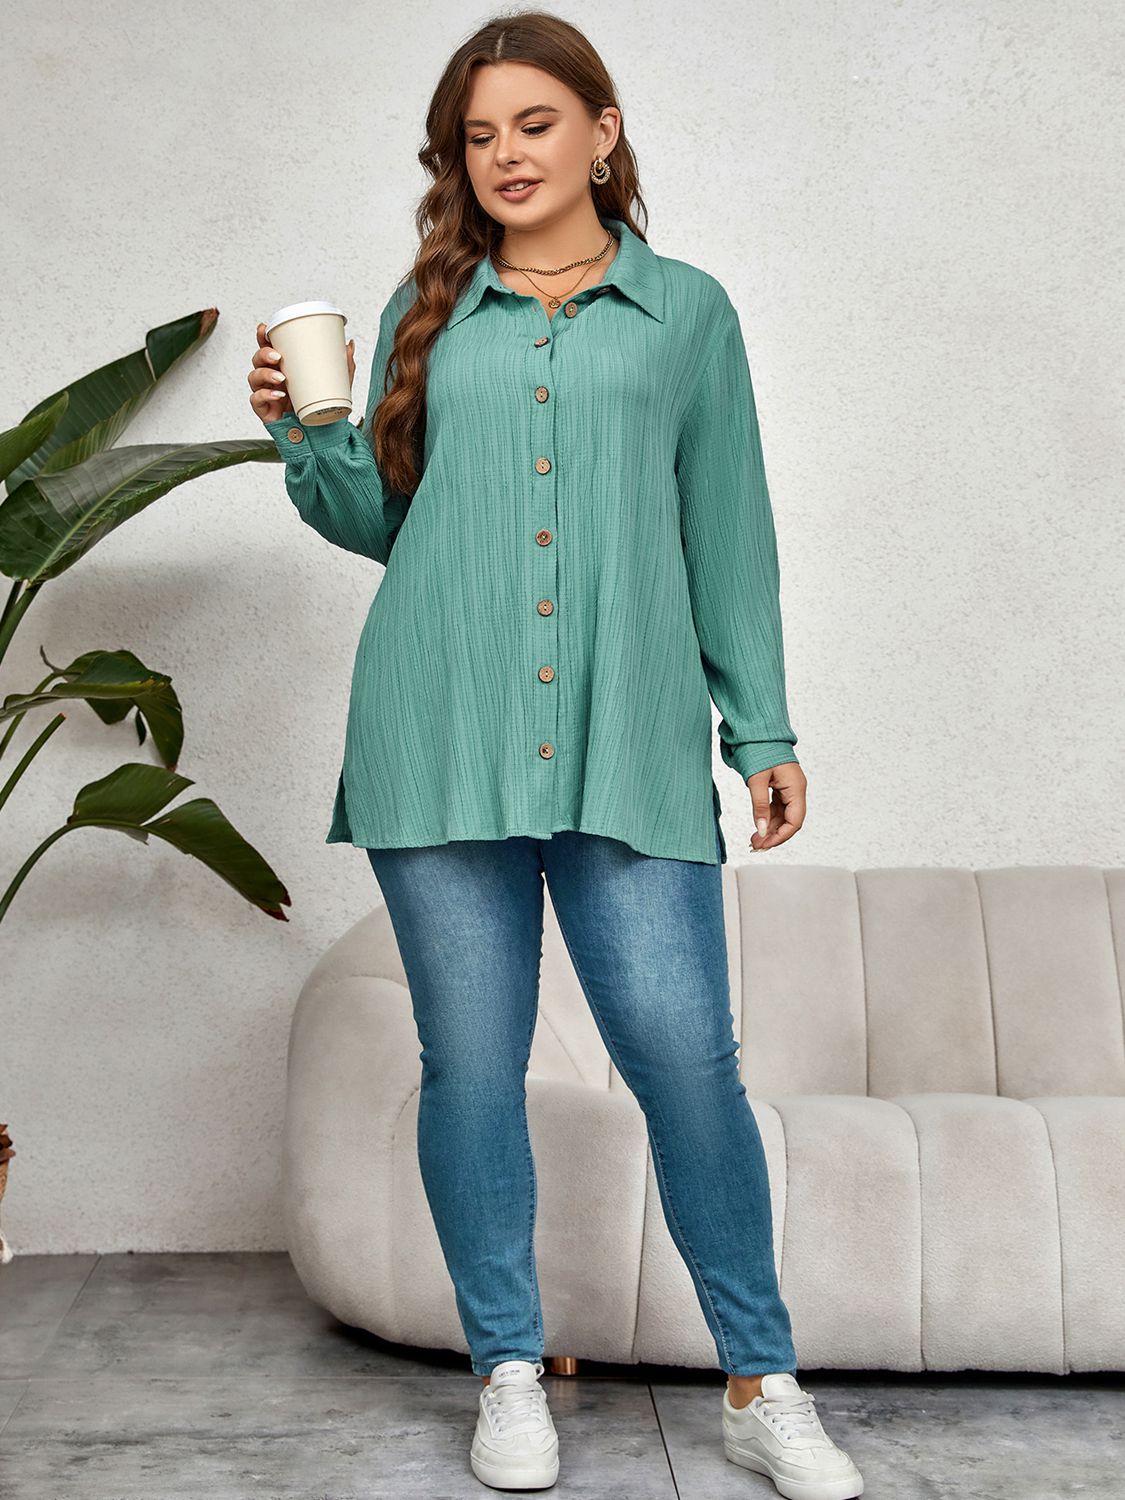 Plus Size Collared Neck Long Sleeve Shirt  Krazy Heart Designs Boutique   